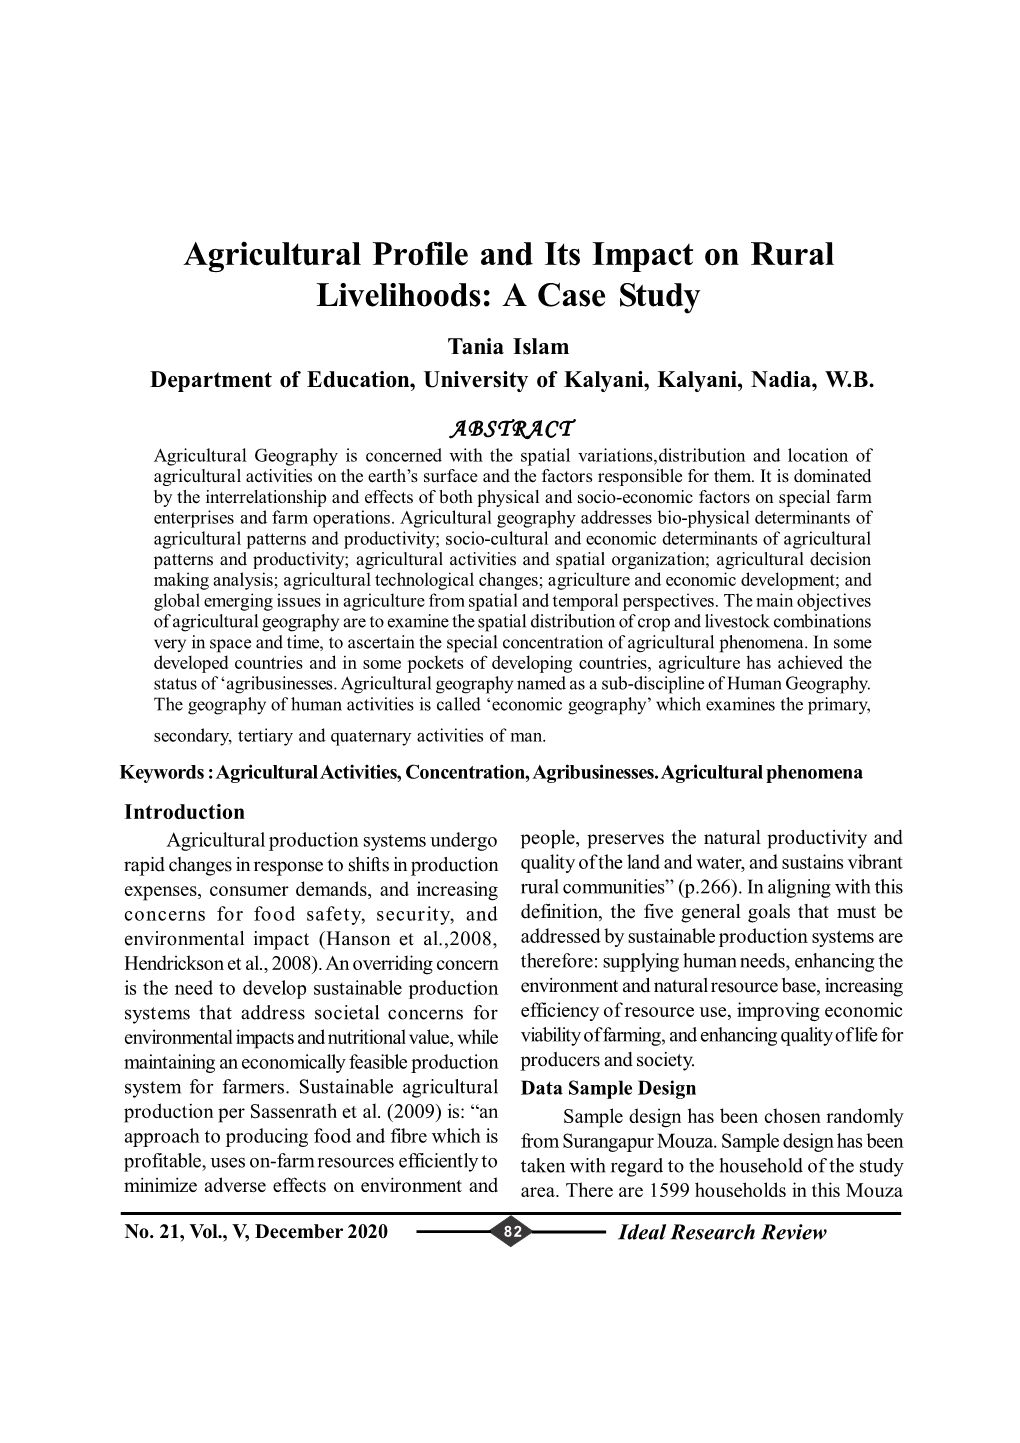 Agricultural Profile and Its Impact on Rural Livelihoods: a Case Study Tania Islam Department of Education, University of Kalyani, Kalyani, Nadia, W.B